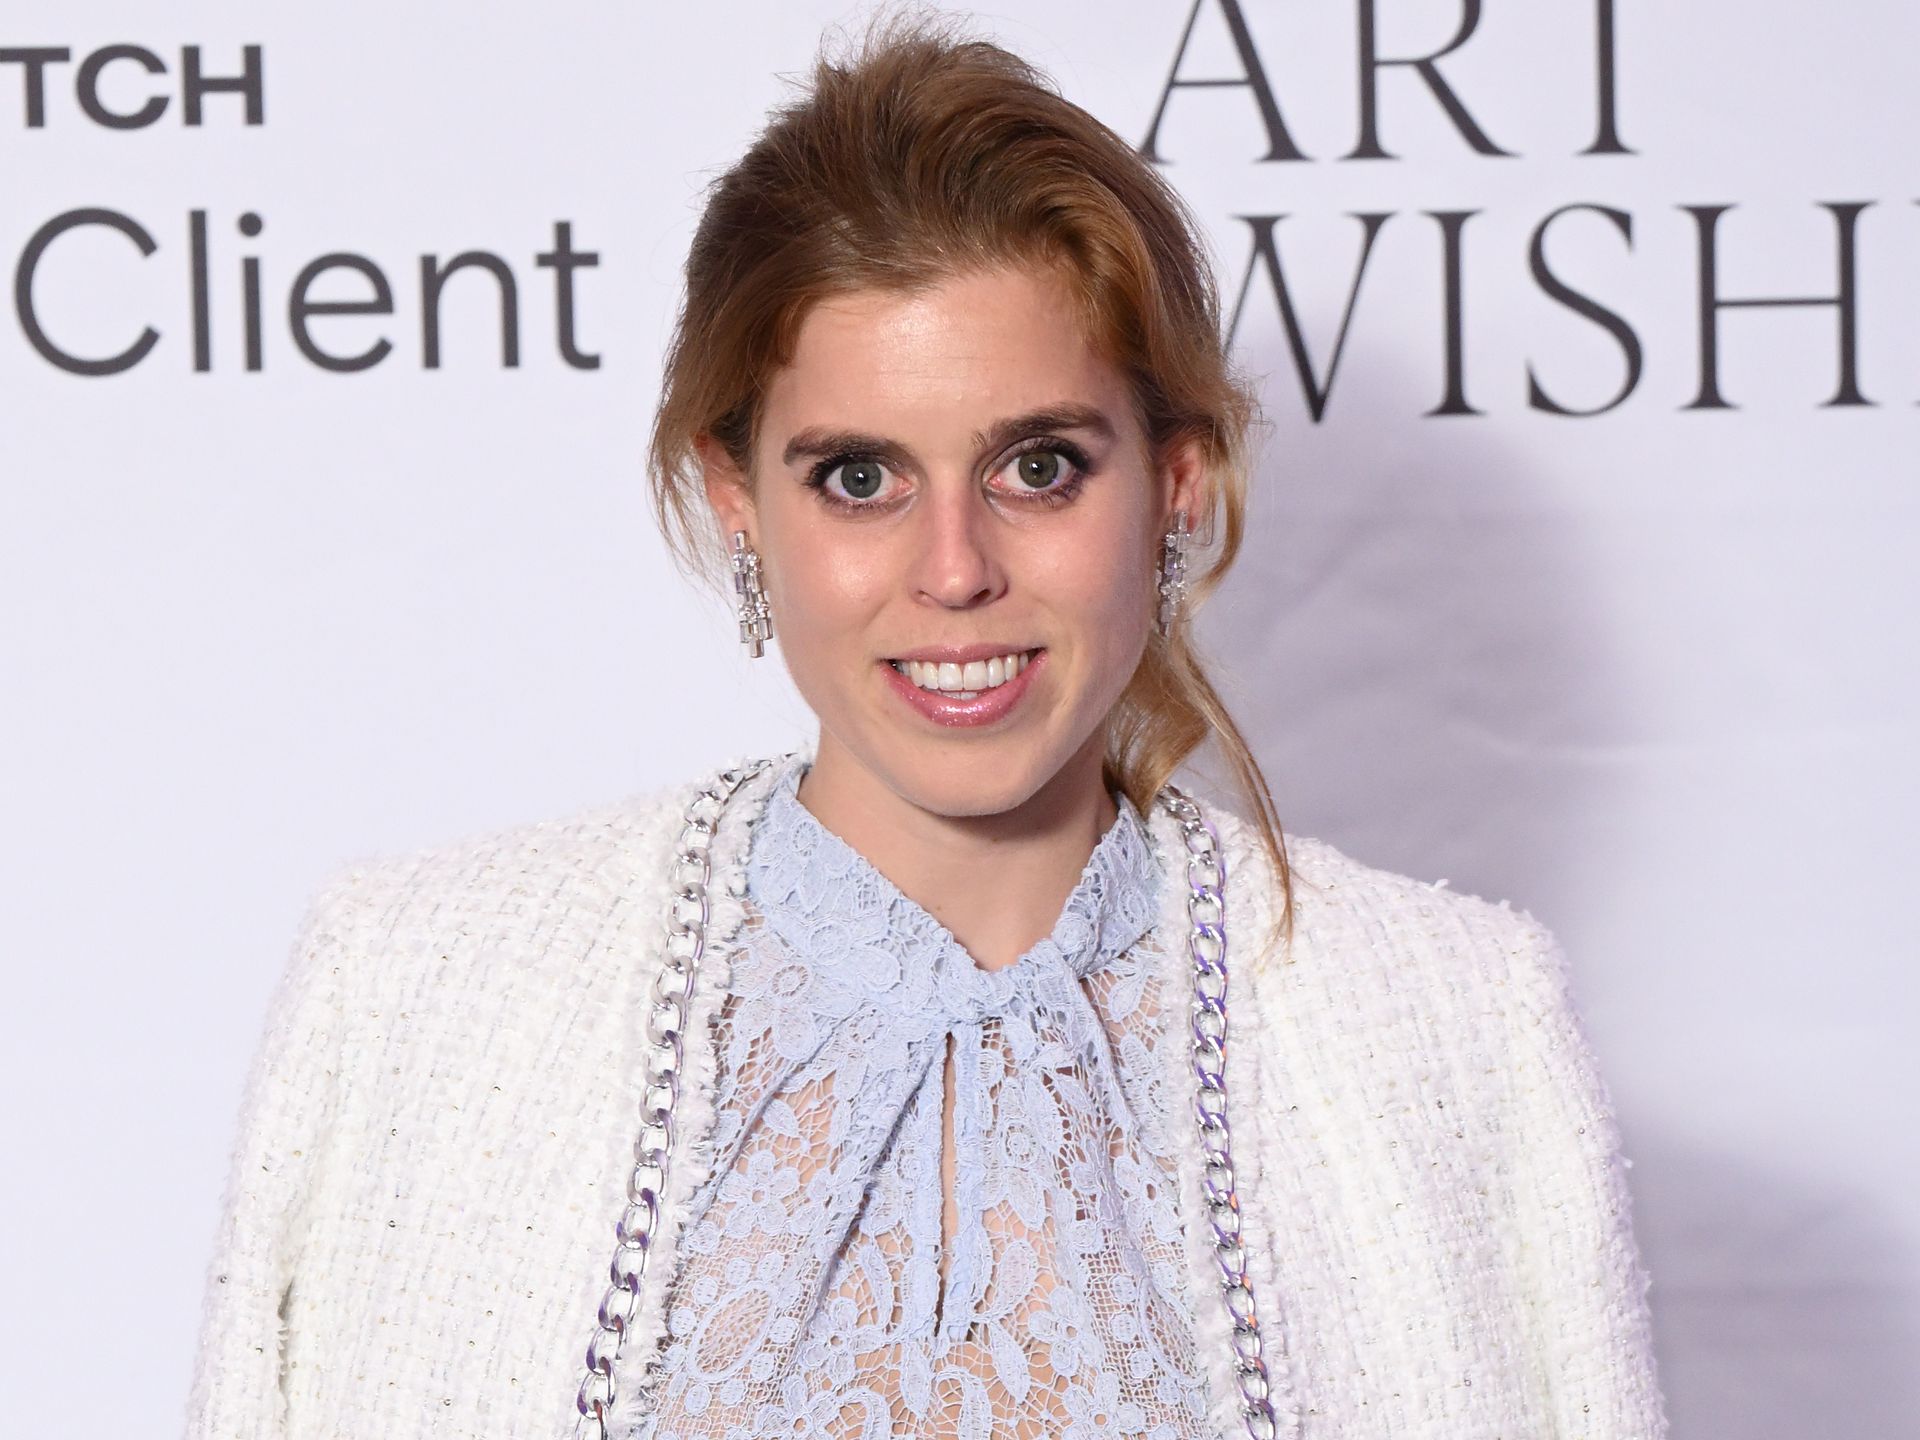 Princess Beatrice's Royal Family role could be set for a major